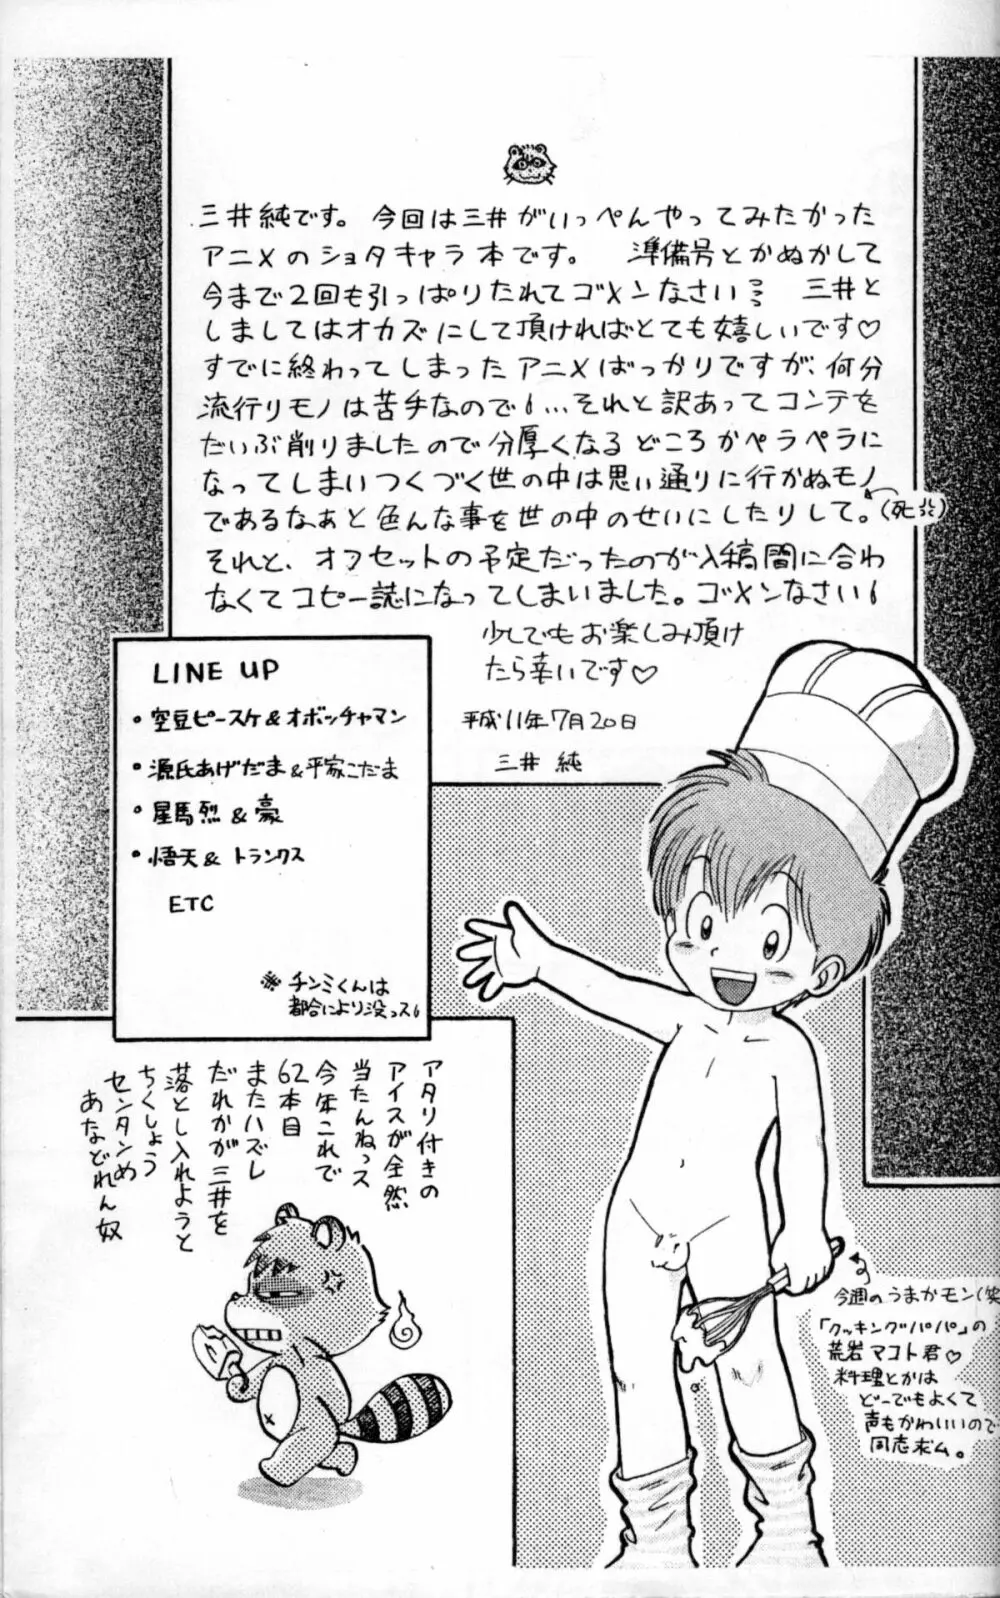 Mitsui Jun - Dreamer’s Only - Anime Shota Character Mix Page.2